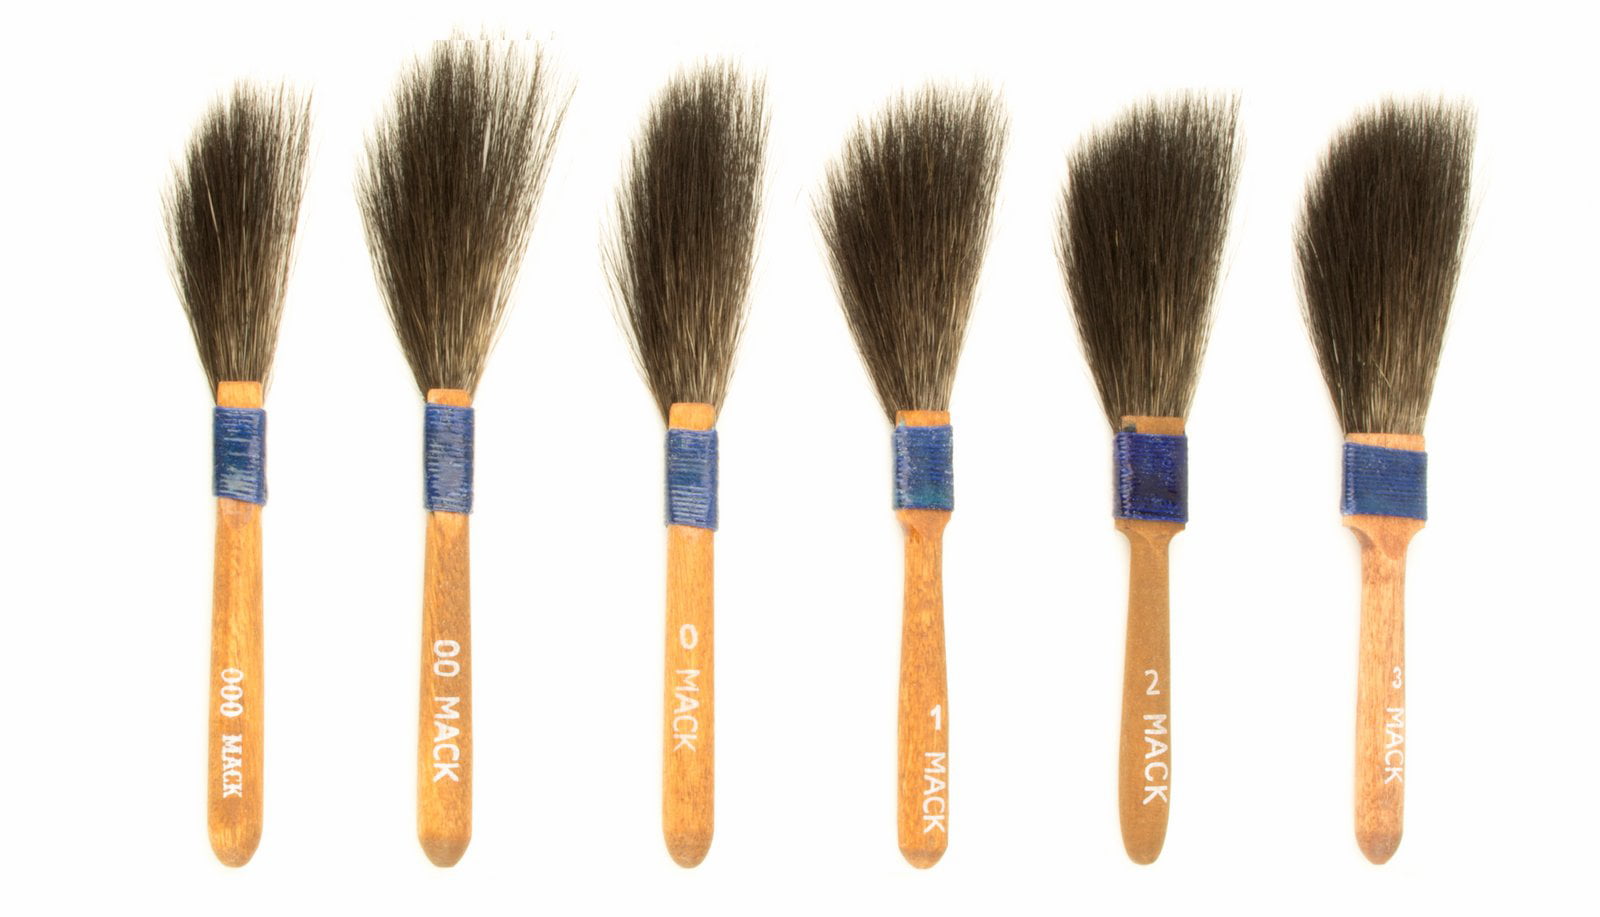 Custom Shop SW Sword Pinstriping Brush 3 Size Kit (#0, 00, 000) One of Each  All 3 Brush Styles - High Performance Striping Brushes